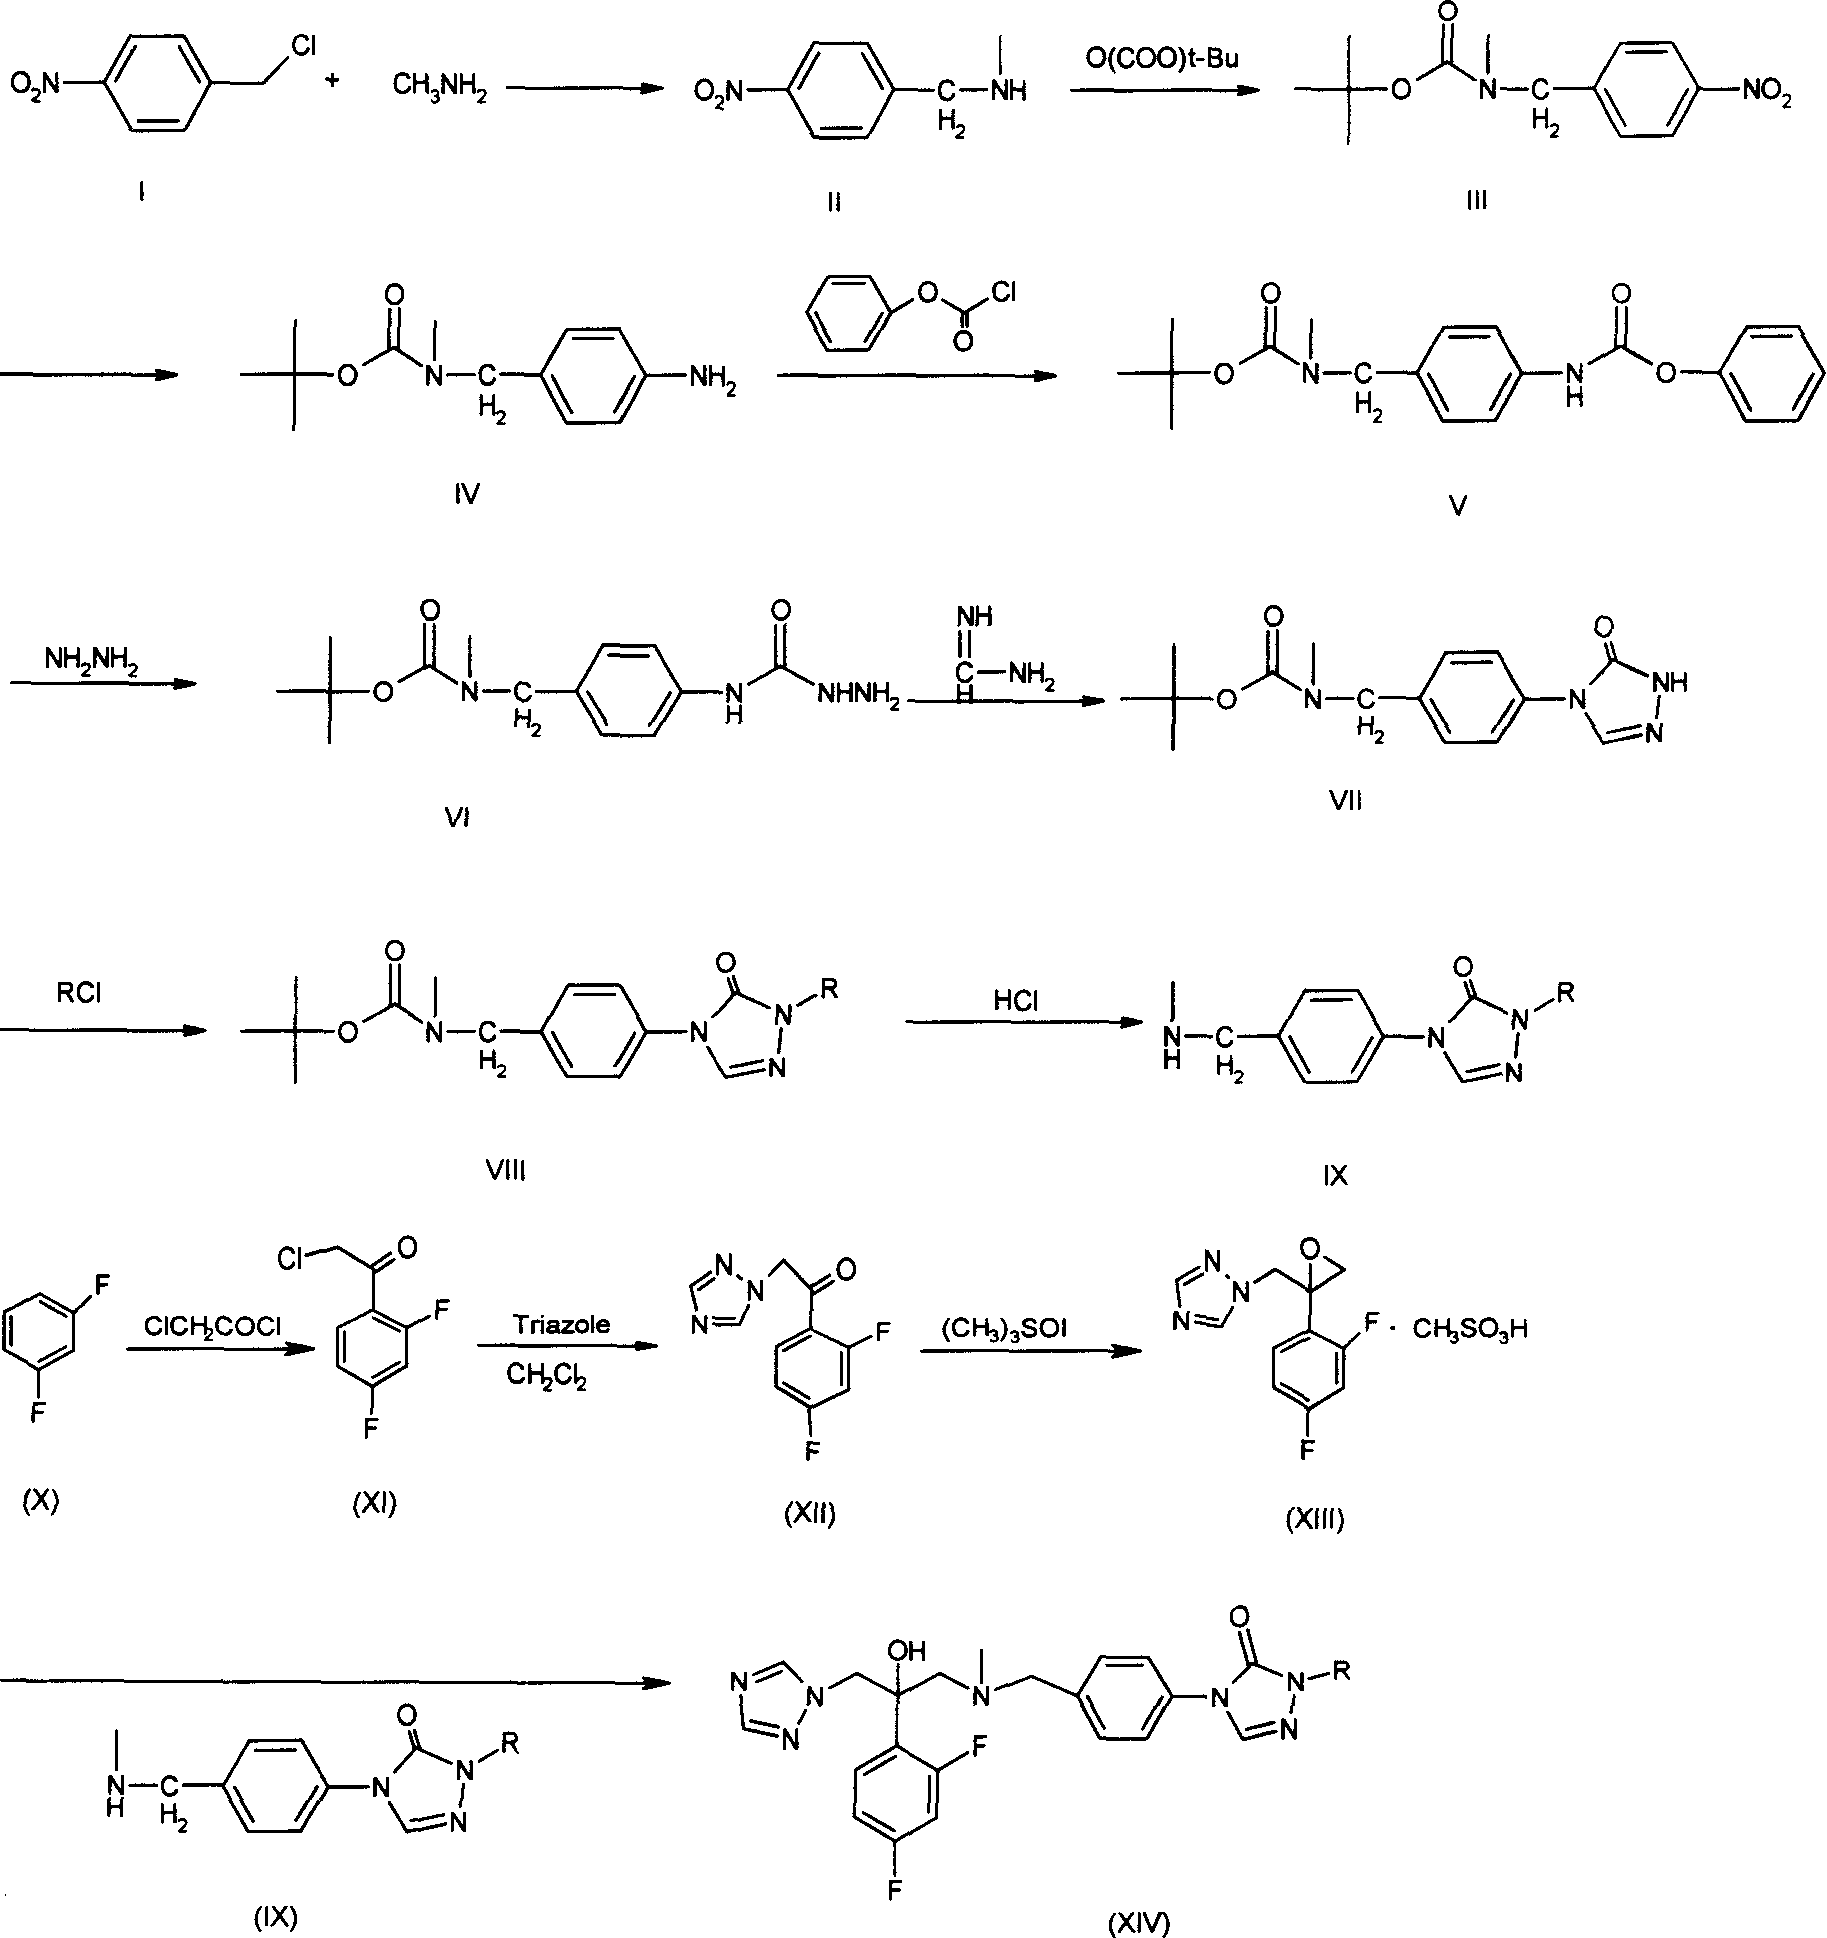 Substituted triazolone benzyl amine triazole antifungal compounds and method for preparing same